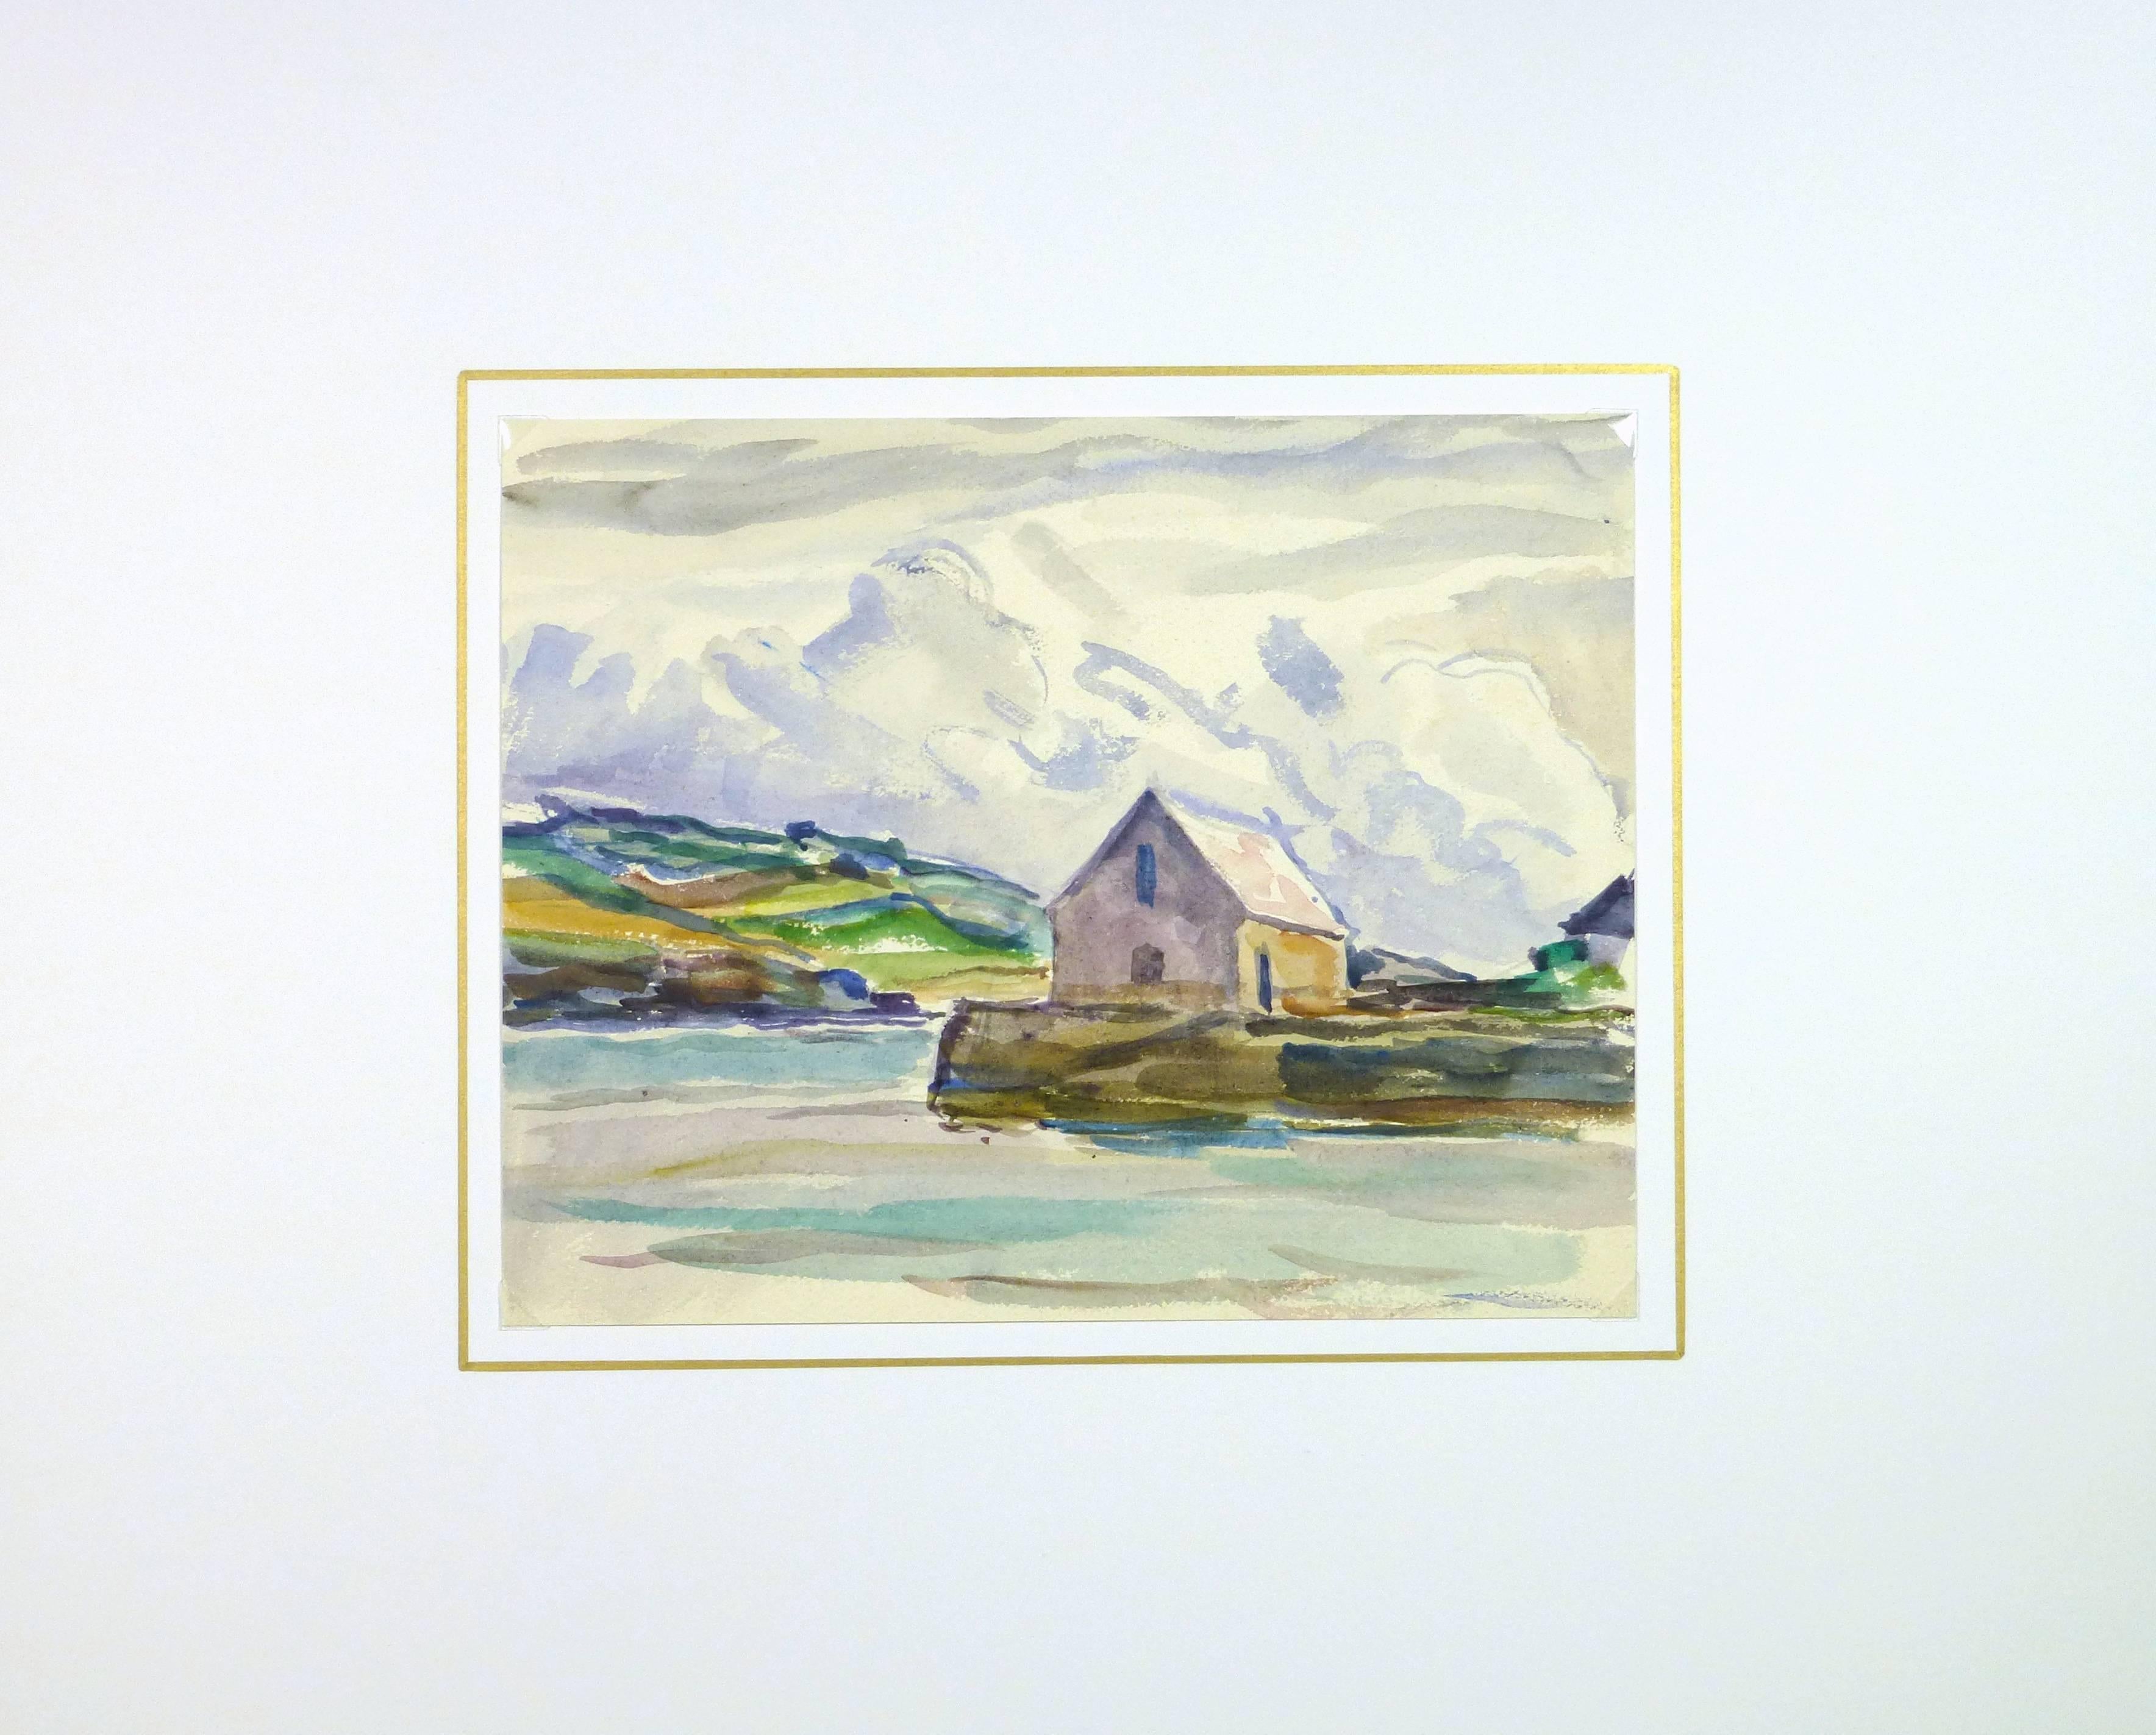 House by the Water - Beige Landscape Art by C. Groux